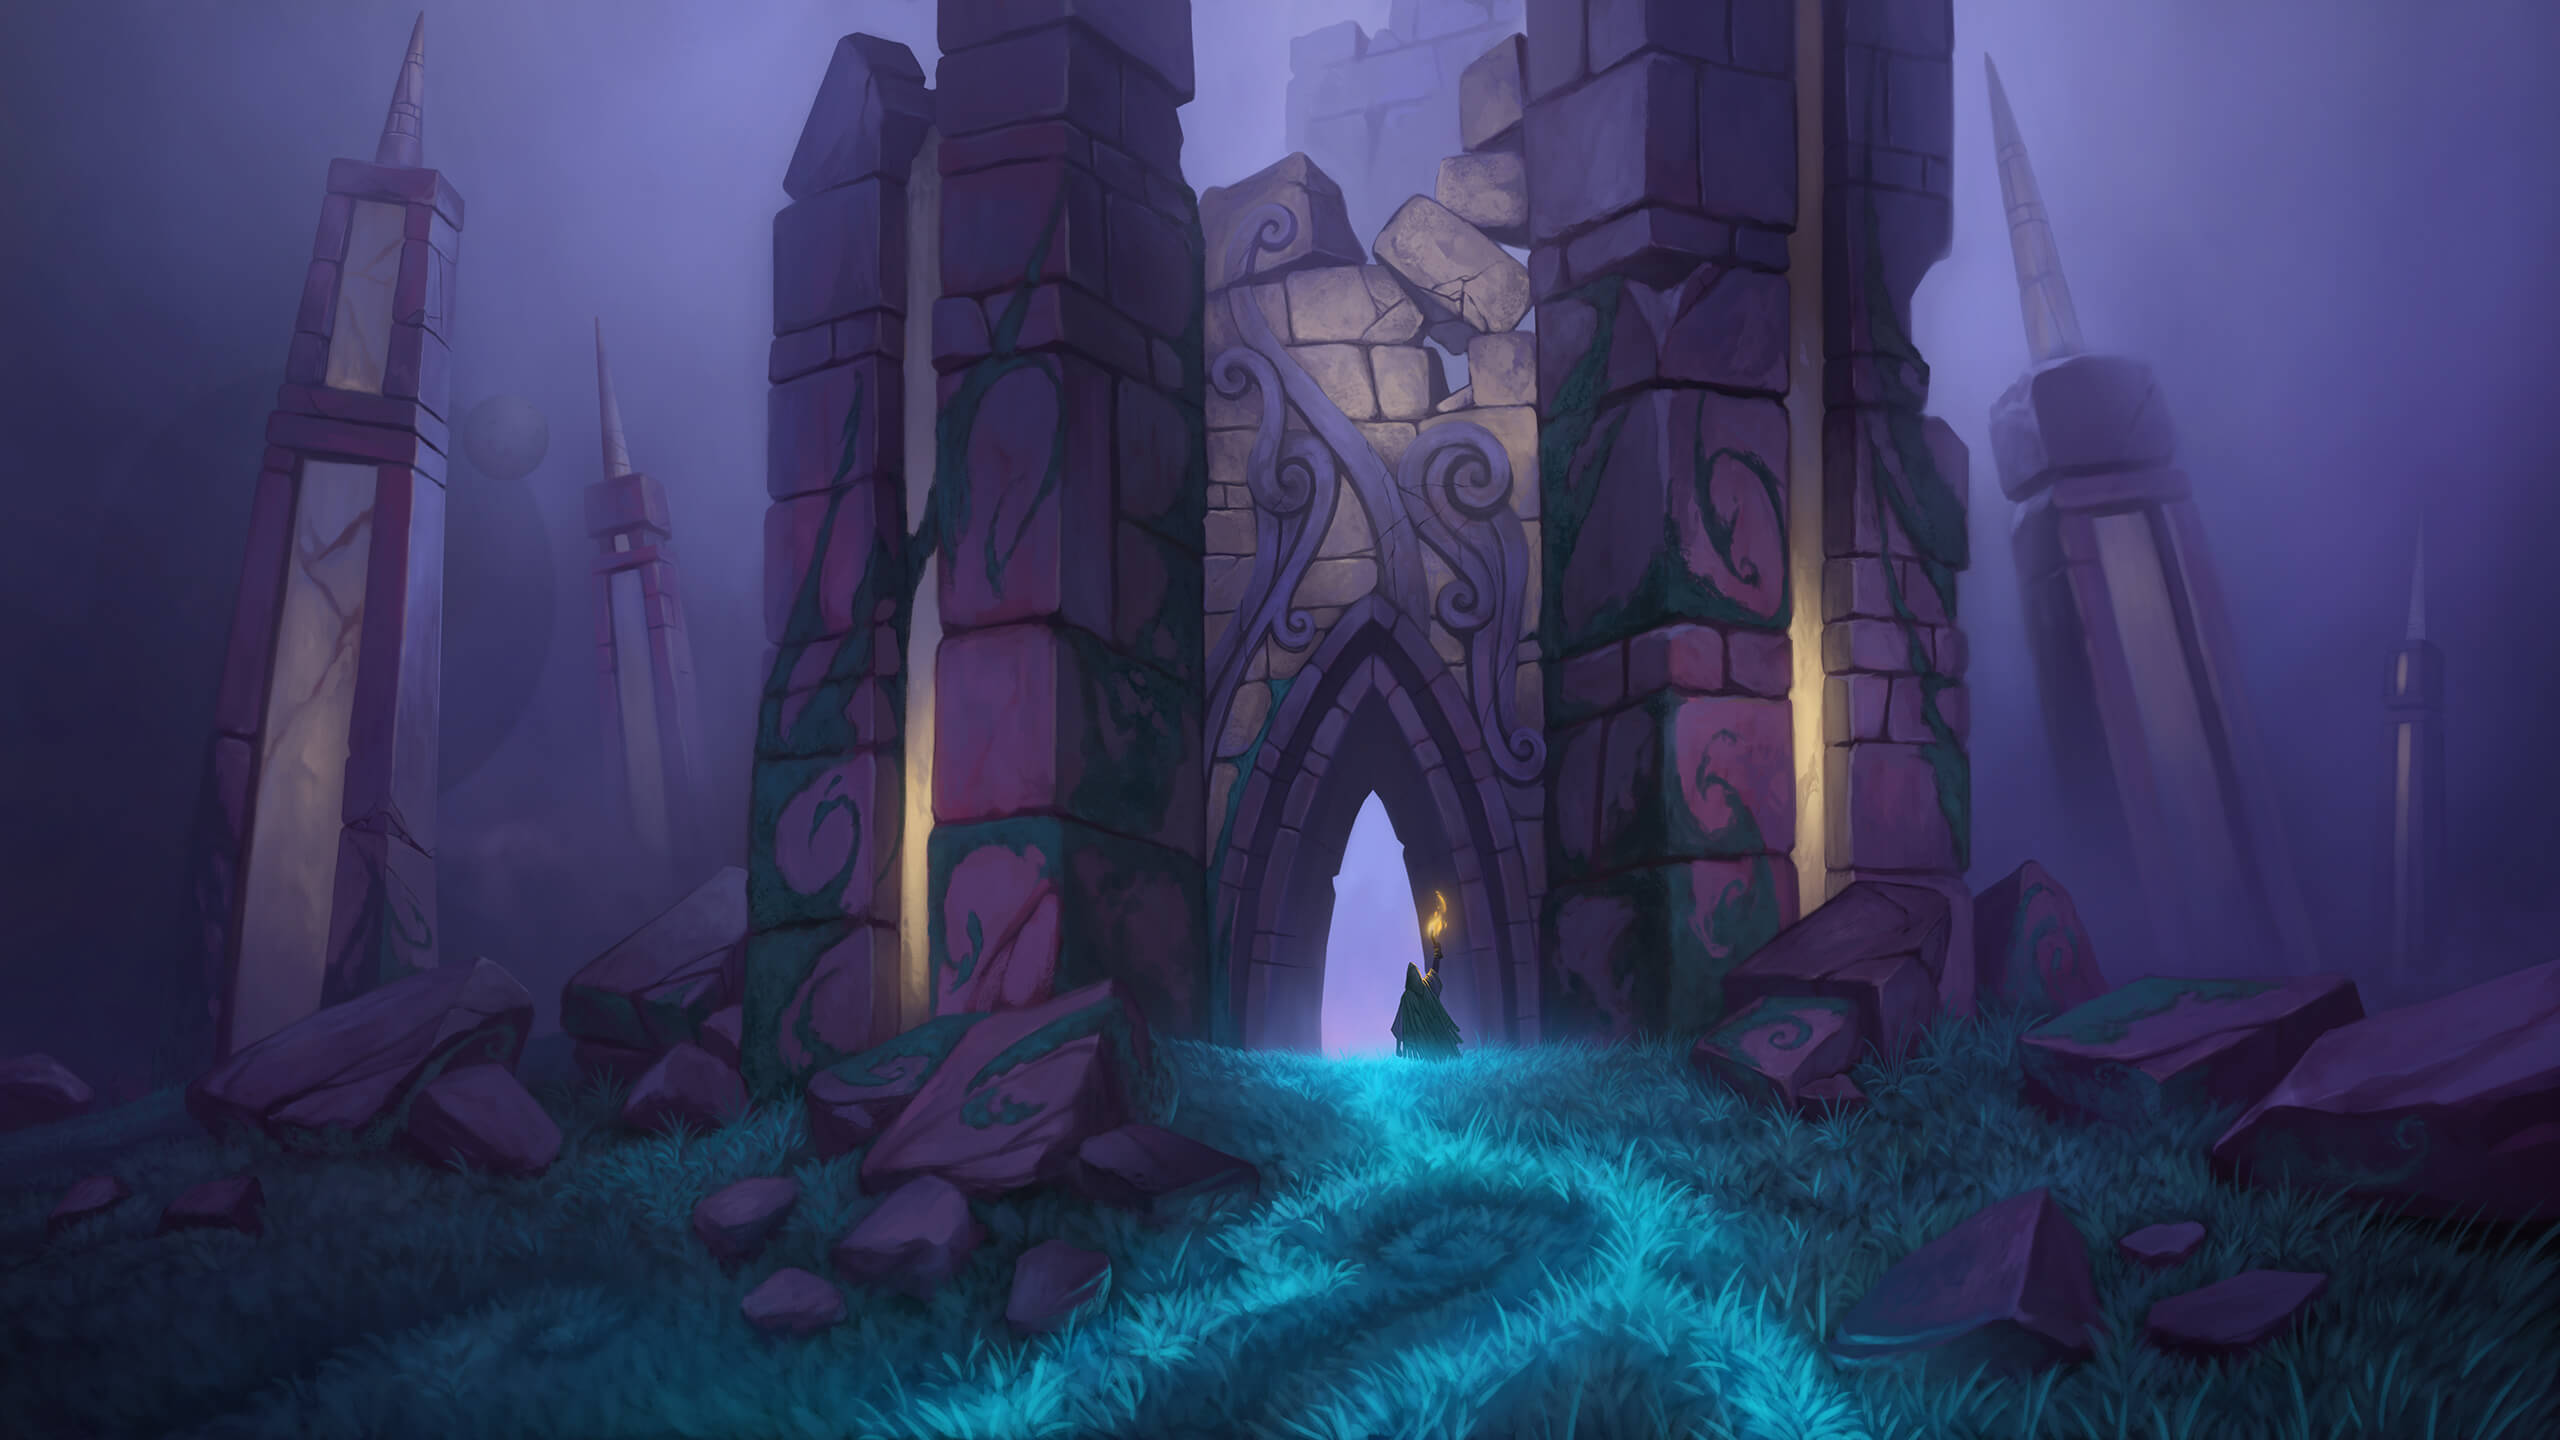 An eerie ruin scene. A once-grand Mythan castle crumbles over the bioluminescent grasses. Moonlight streams down from a full moon and a small figure carrying a torch peers inside the ancient, arched doorway.